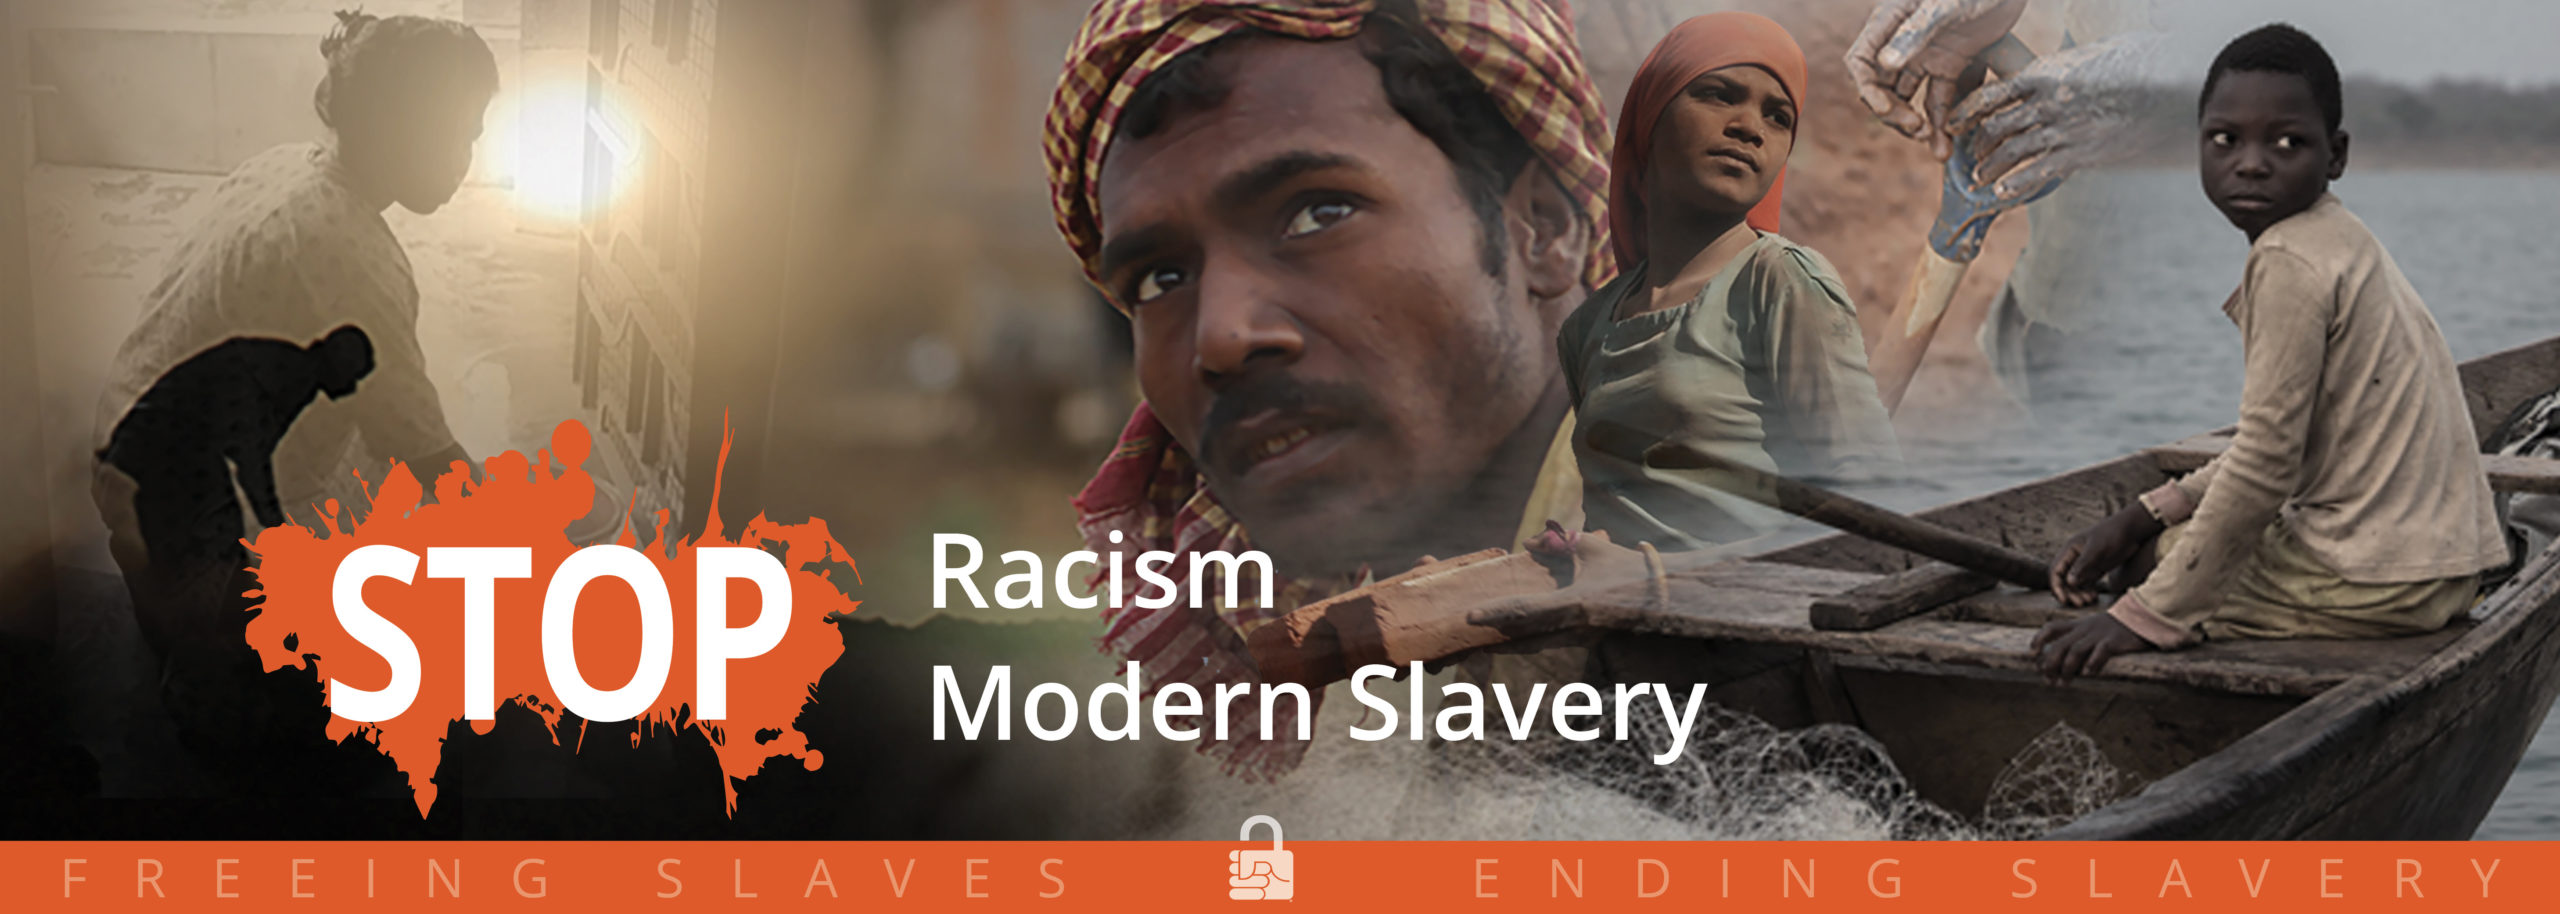 Can You Envision a World Free from Slavery?